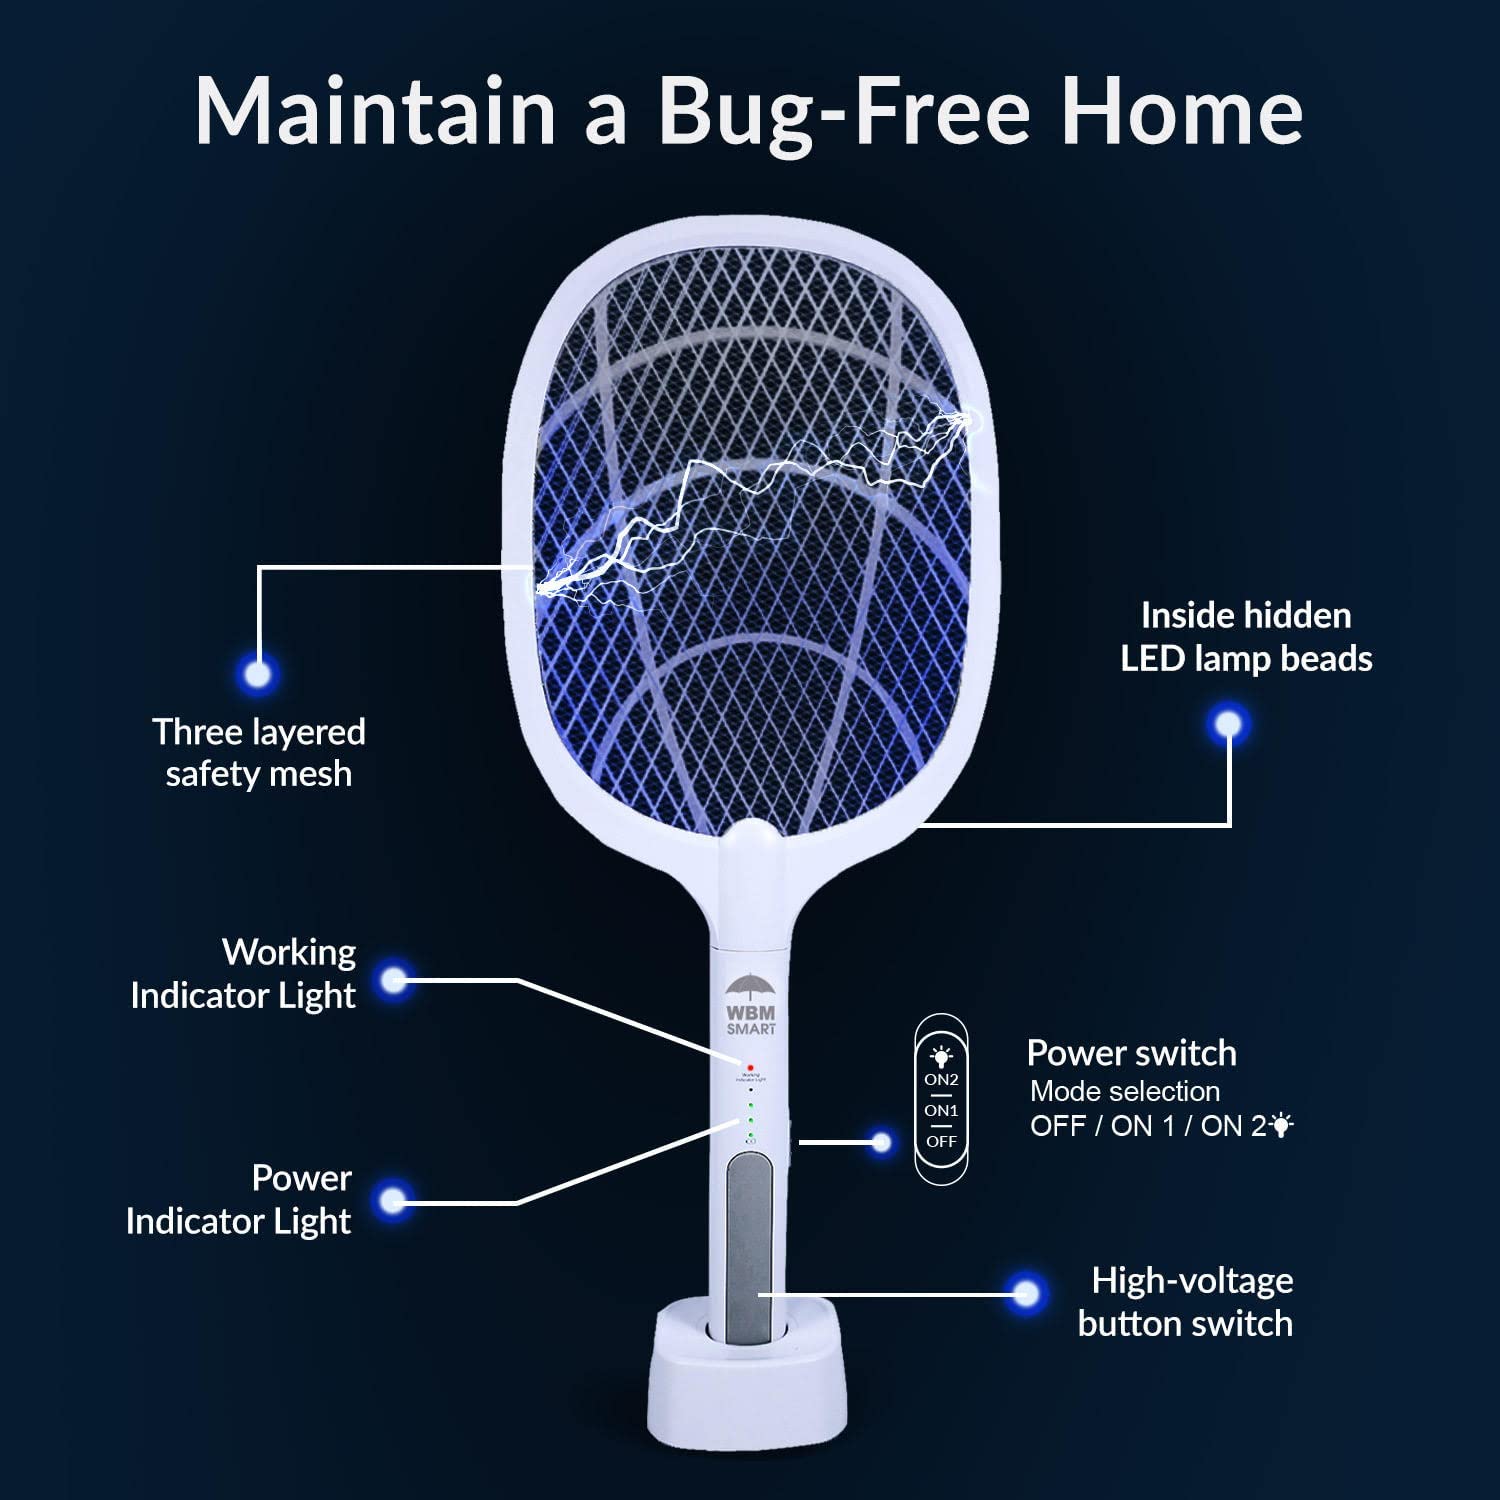 USB Rechargeable and Battery Powered Mosquito Killer